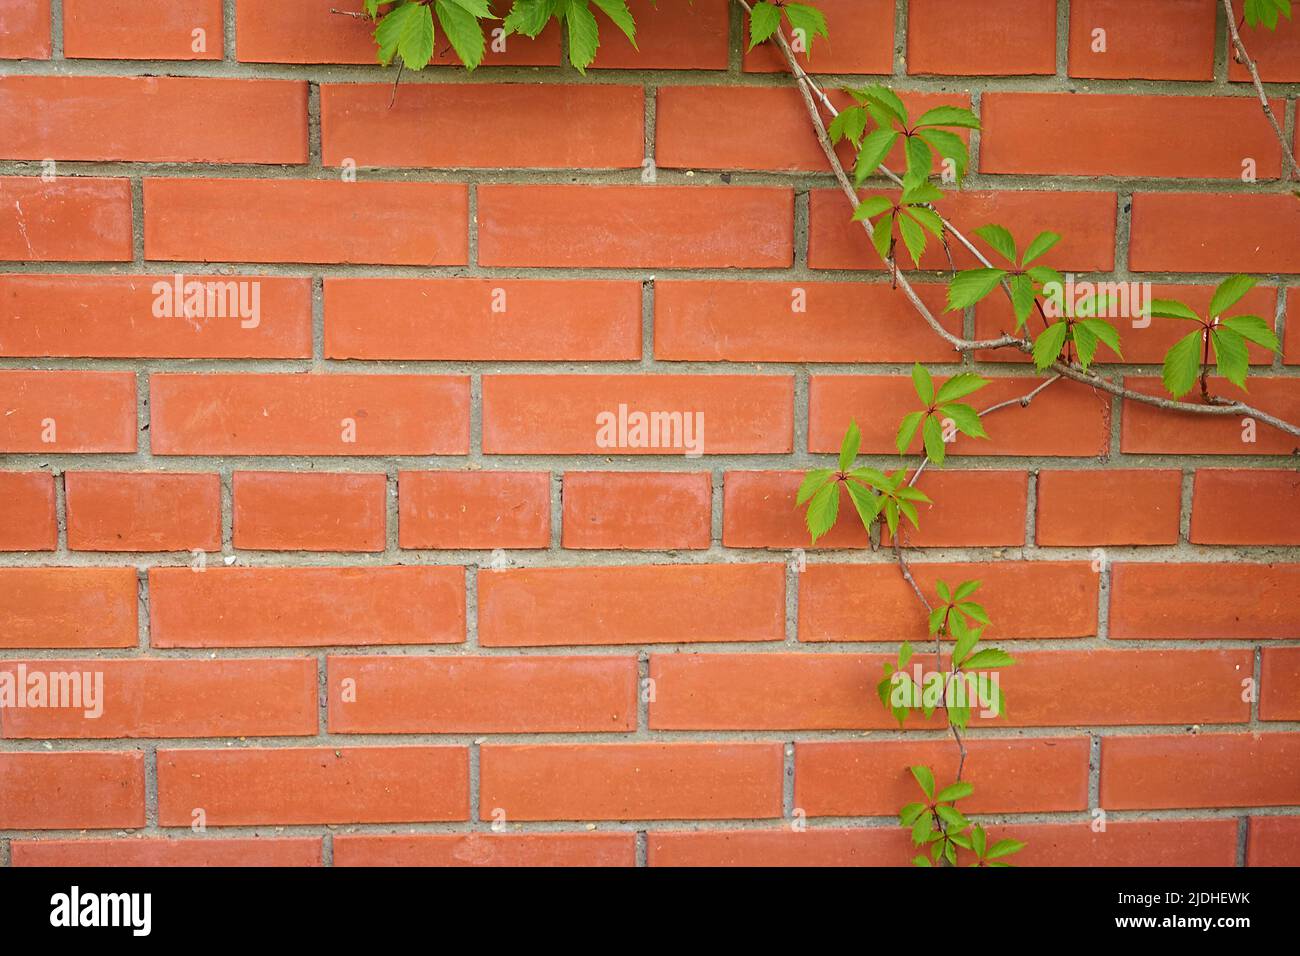 Parthenocissus quinquefolia. A red brick wall with a branch of maiden grapes. Horizontal format Stock Photo